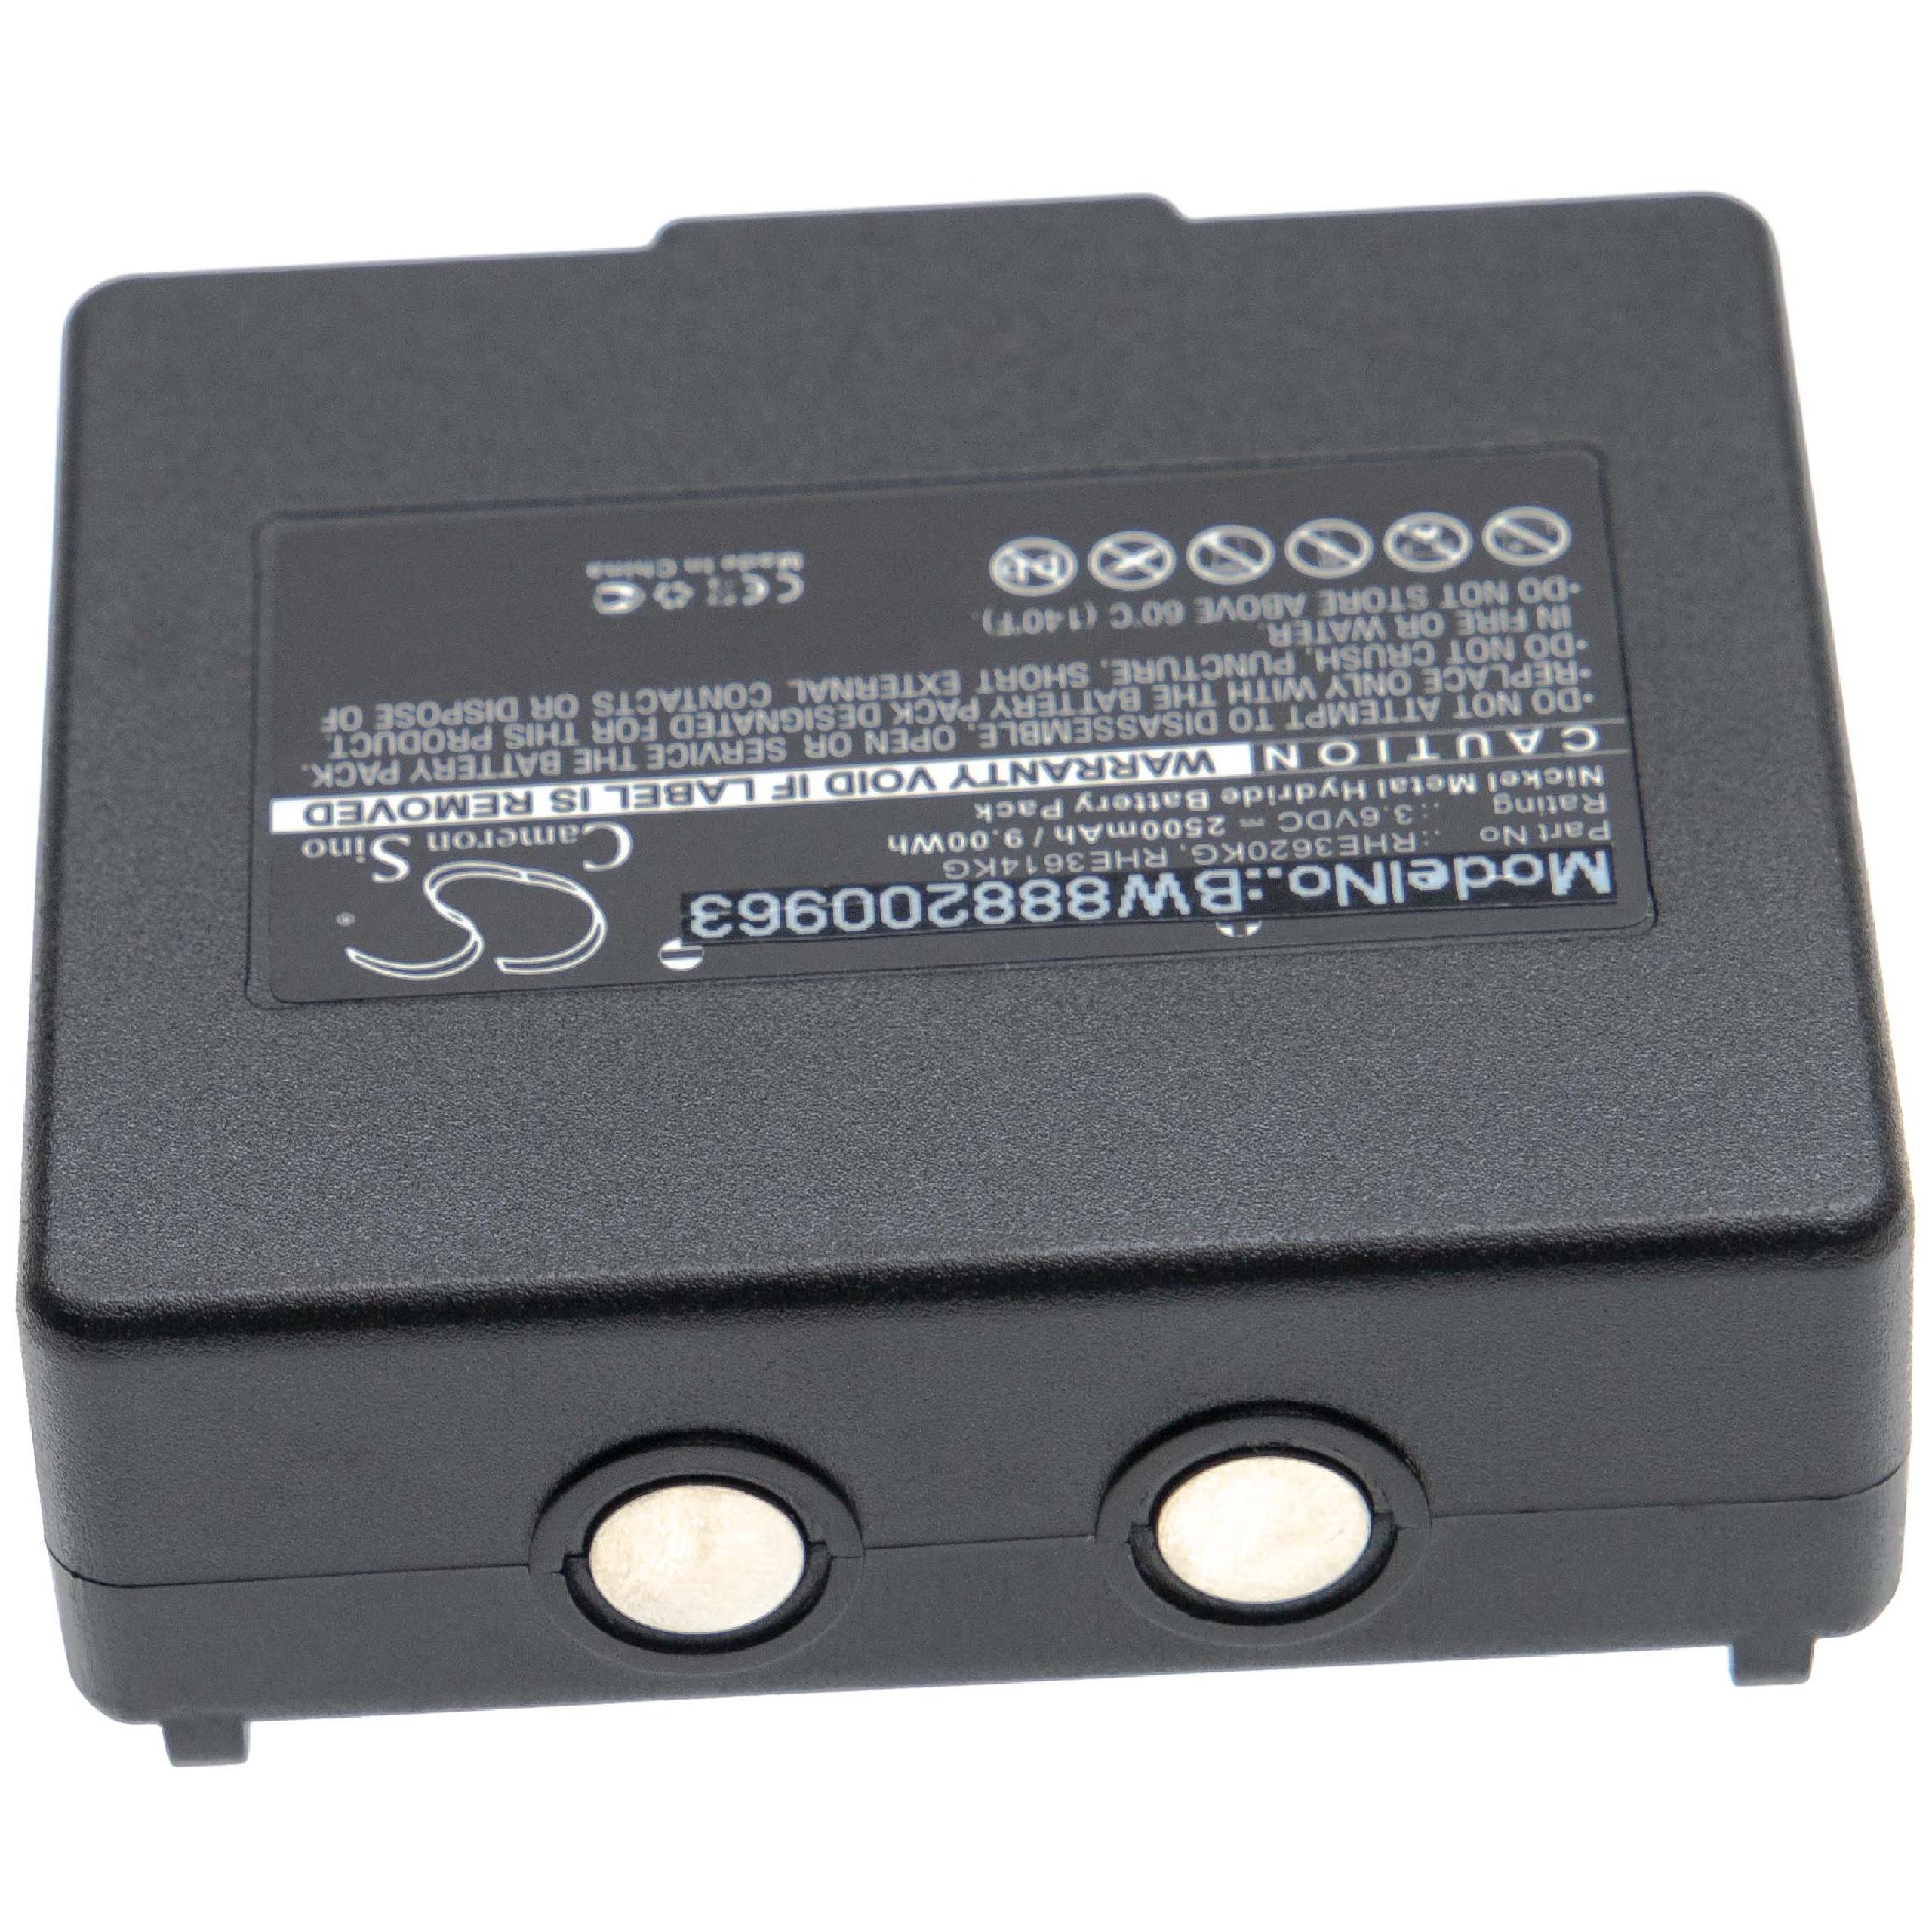 Industrial Remote Control Battery Replacement for Abitron KH68300990, EX2-22 - 2500mAh 3.6V NiMH